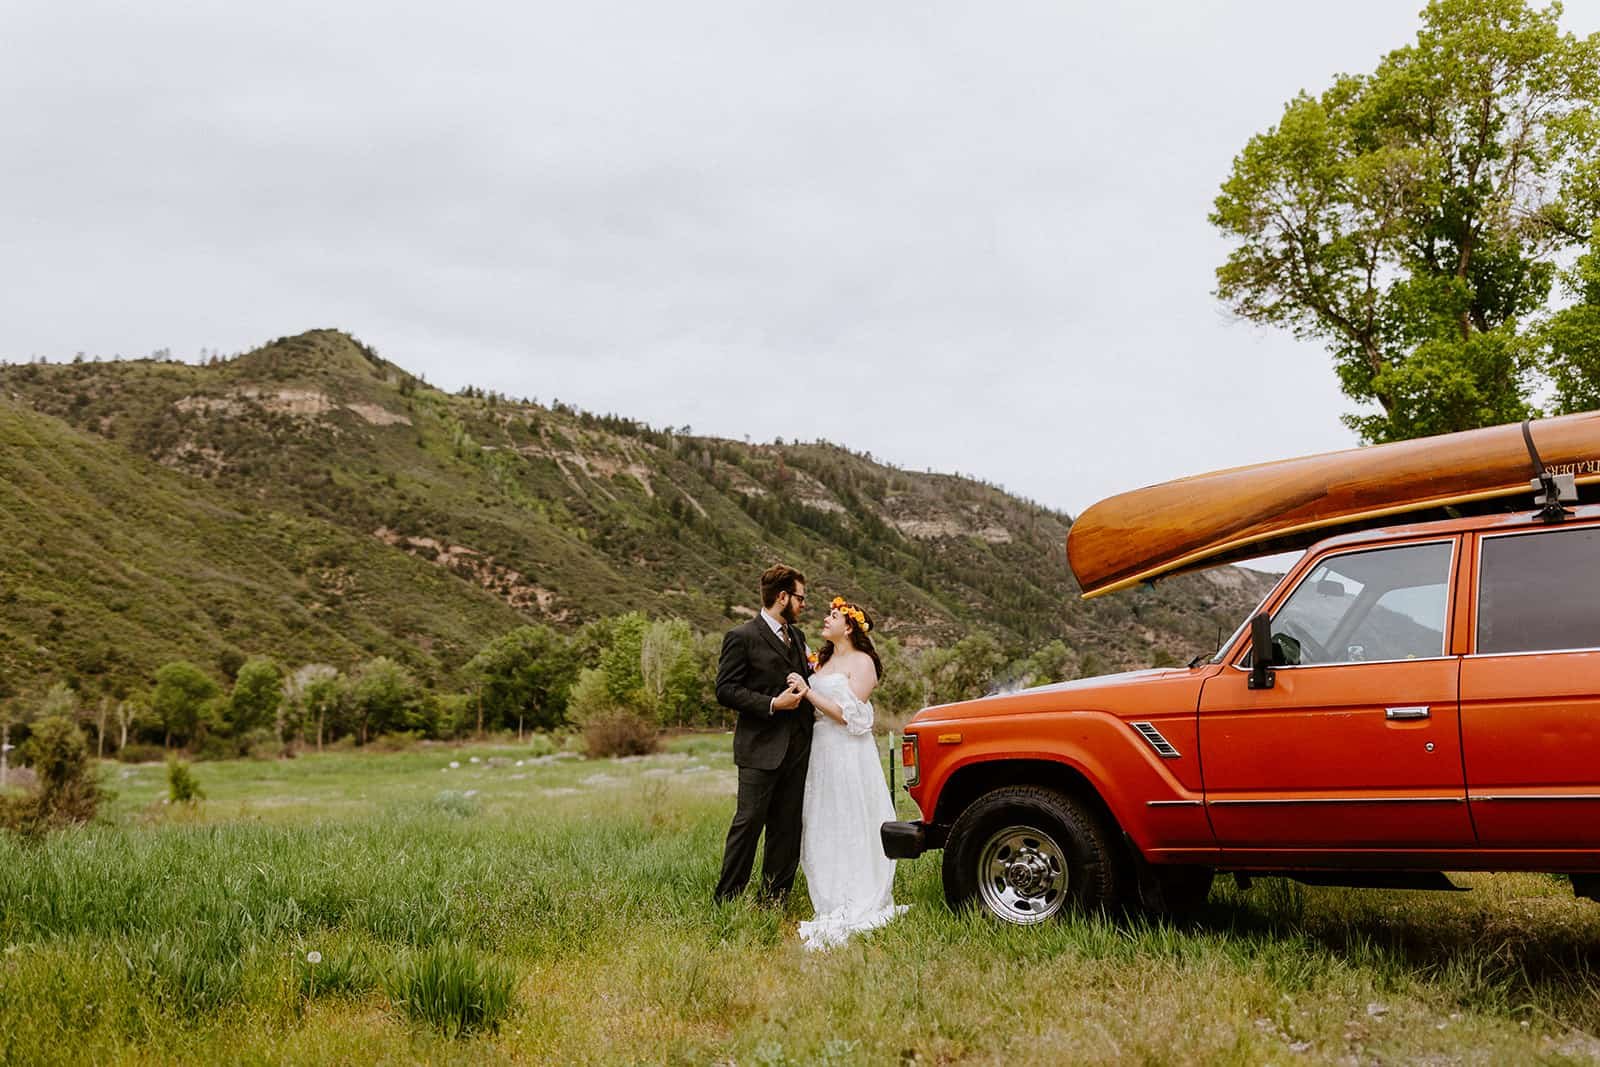 A man and woman in a wedding dress and suit smile and embrace in front of a red Toyota Land Cruiser